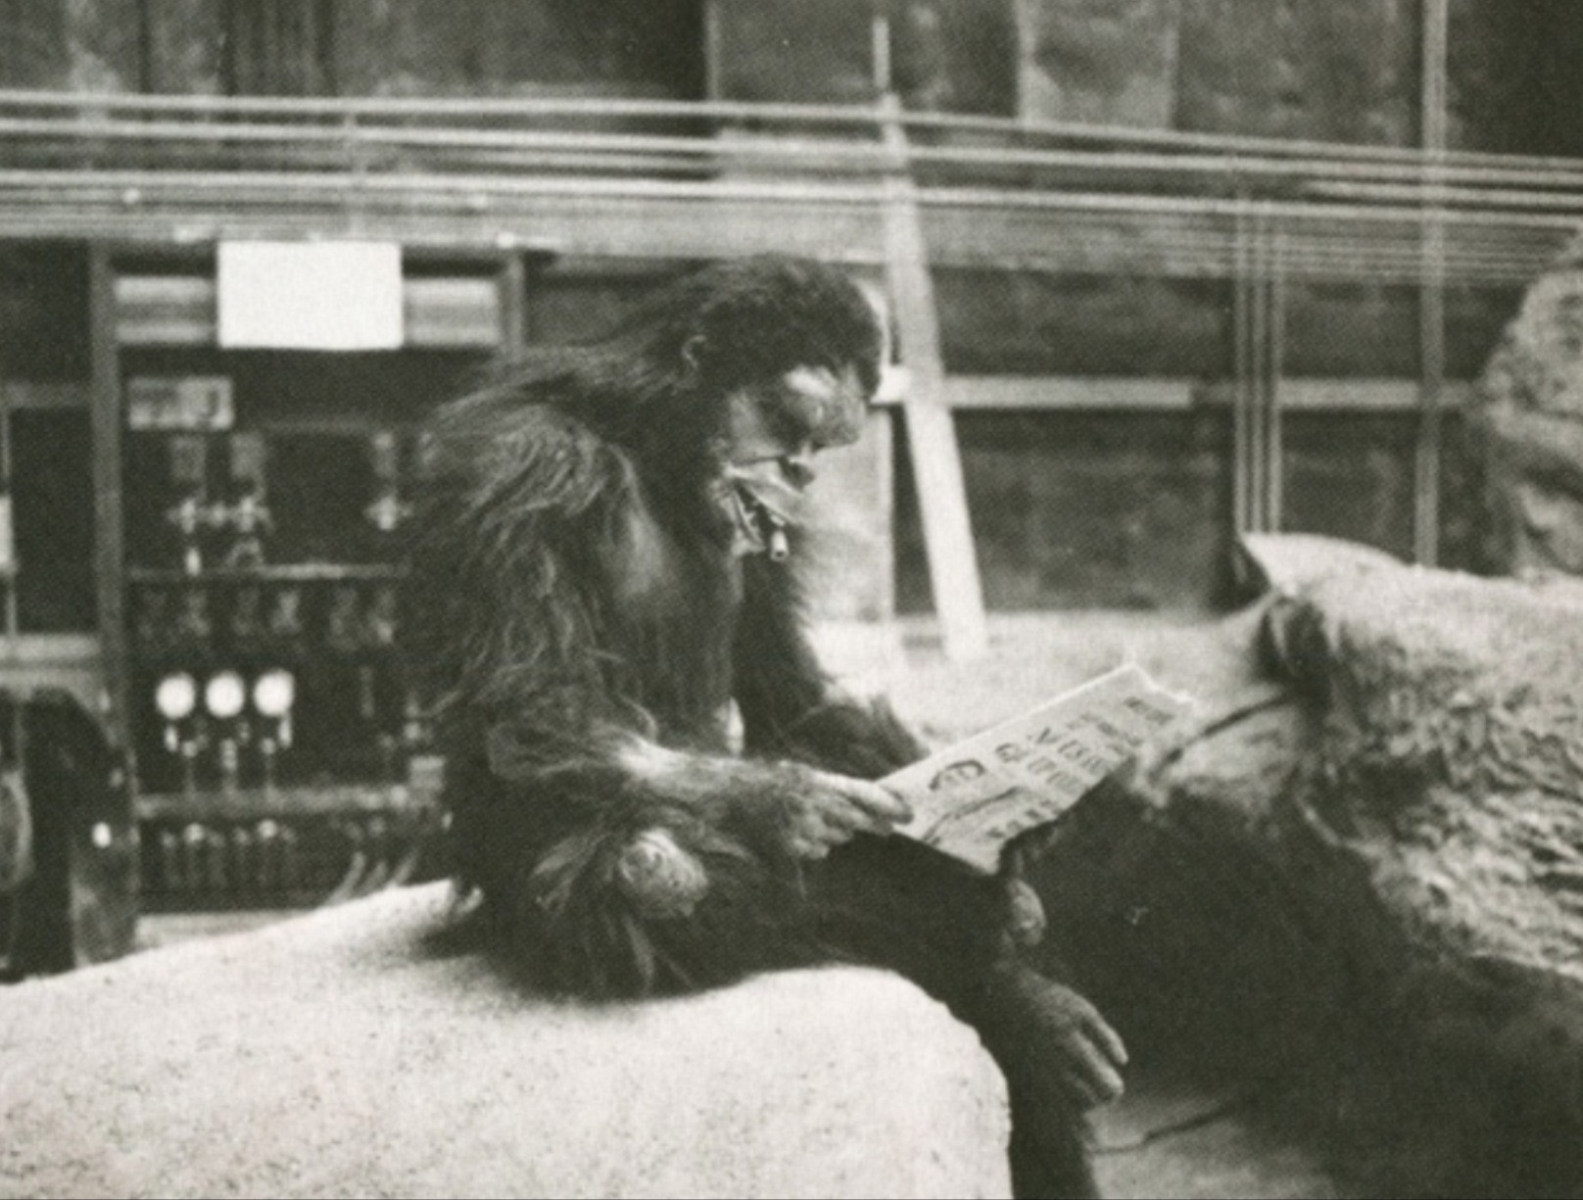 2001: A Space Odyssey Behind the Scenes Photos & Tech Specs